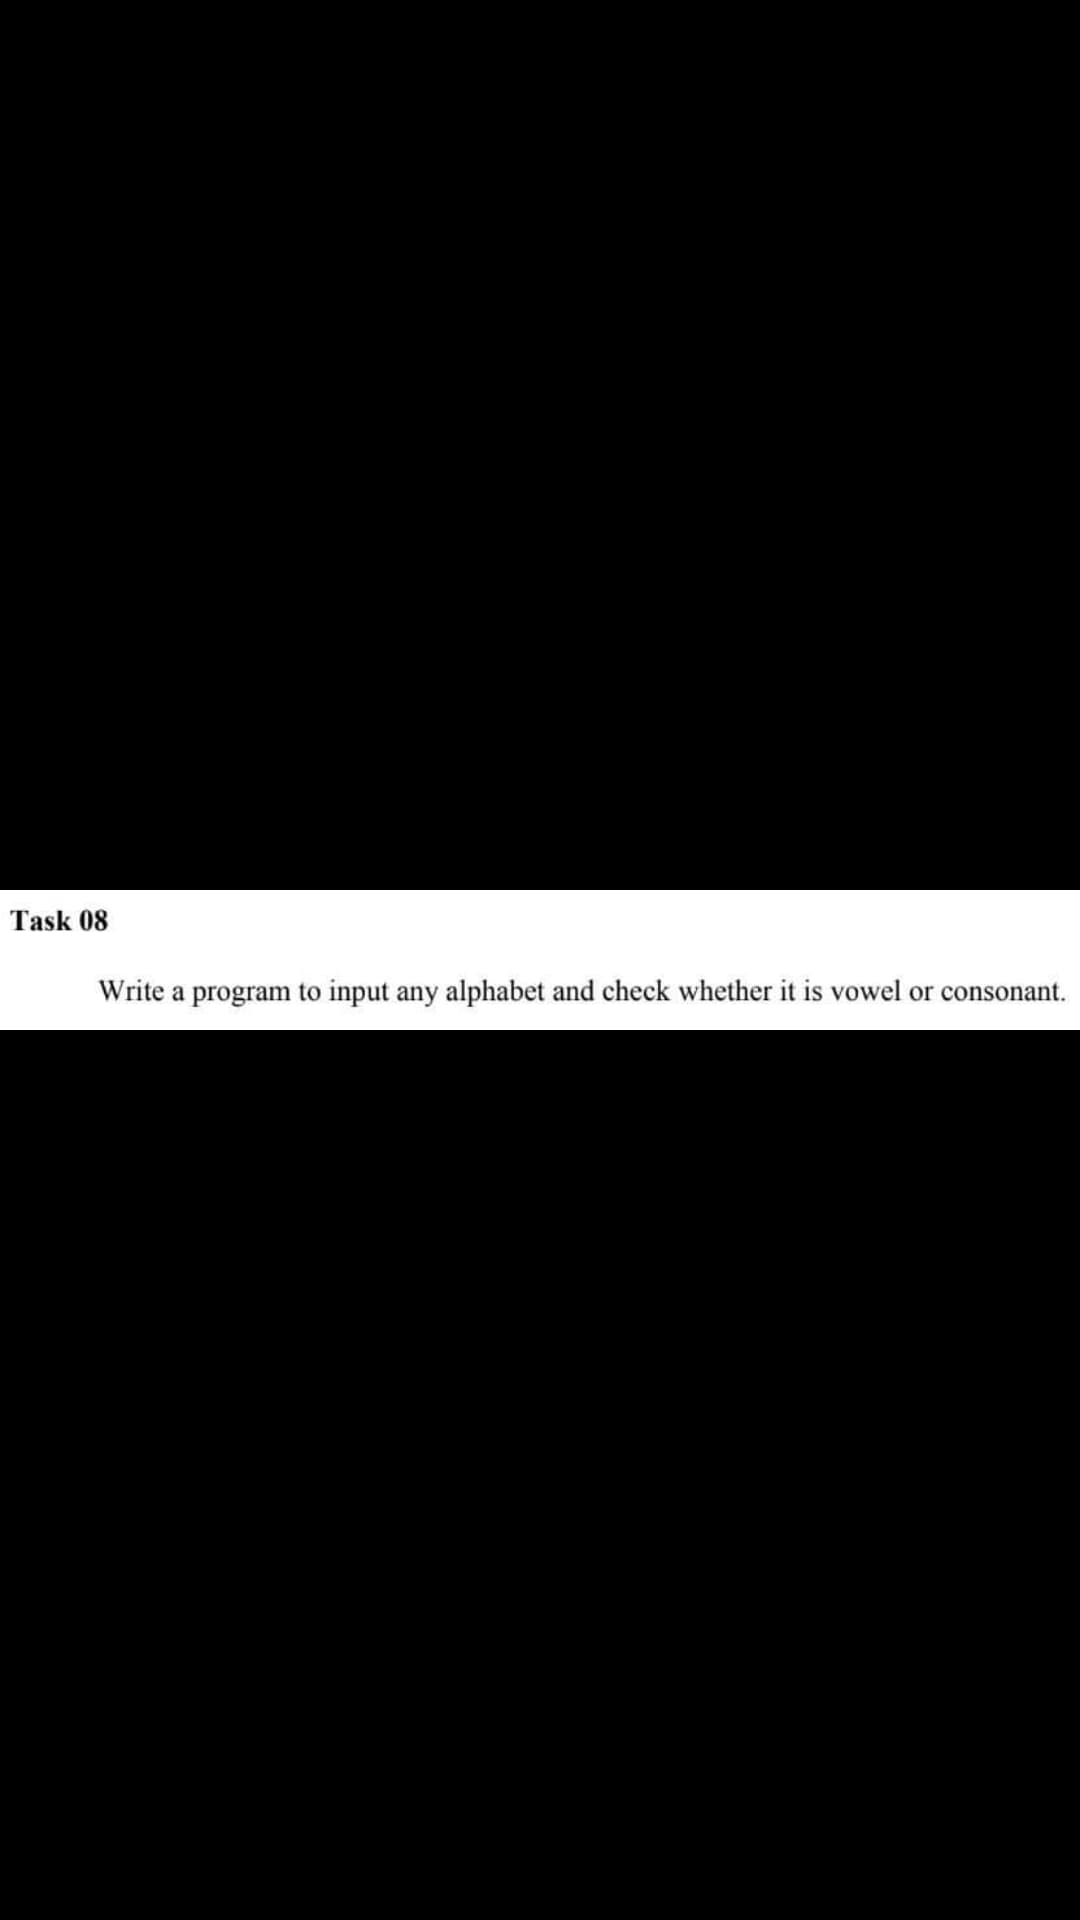 Task 08
Write a program to input any alphabet and check whether it is vowel or consonant.
